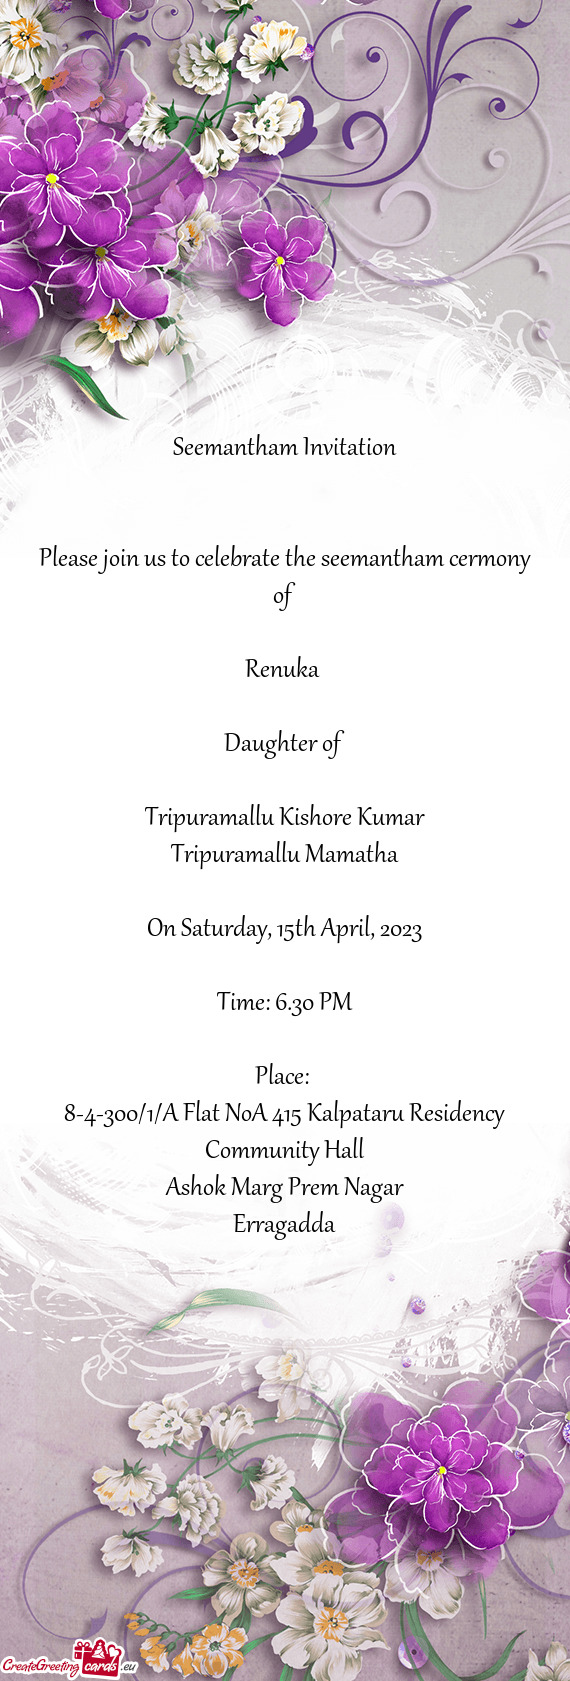 Please join us to celebrate the seemantham cermony of